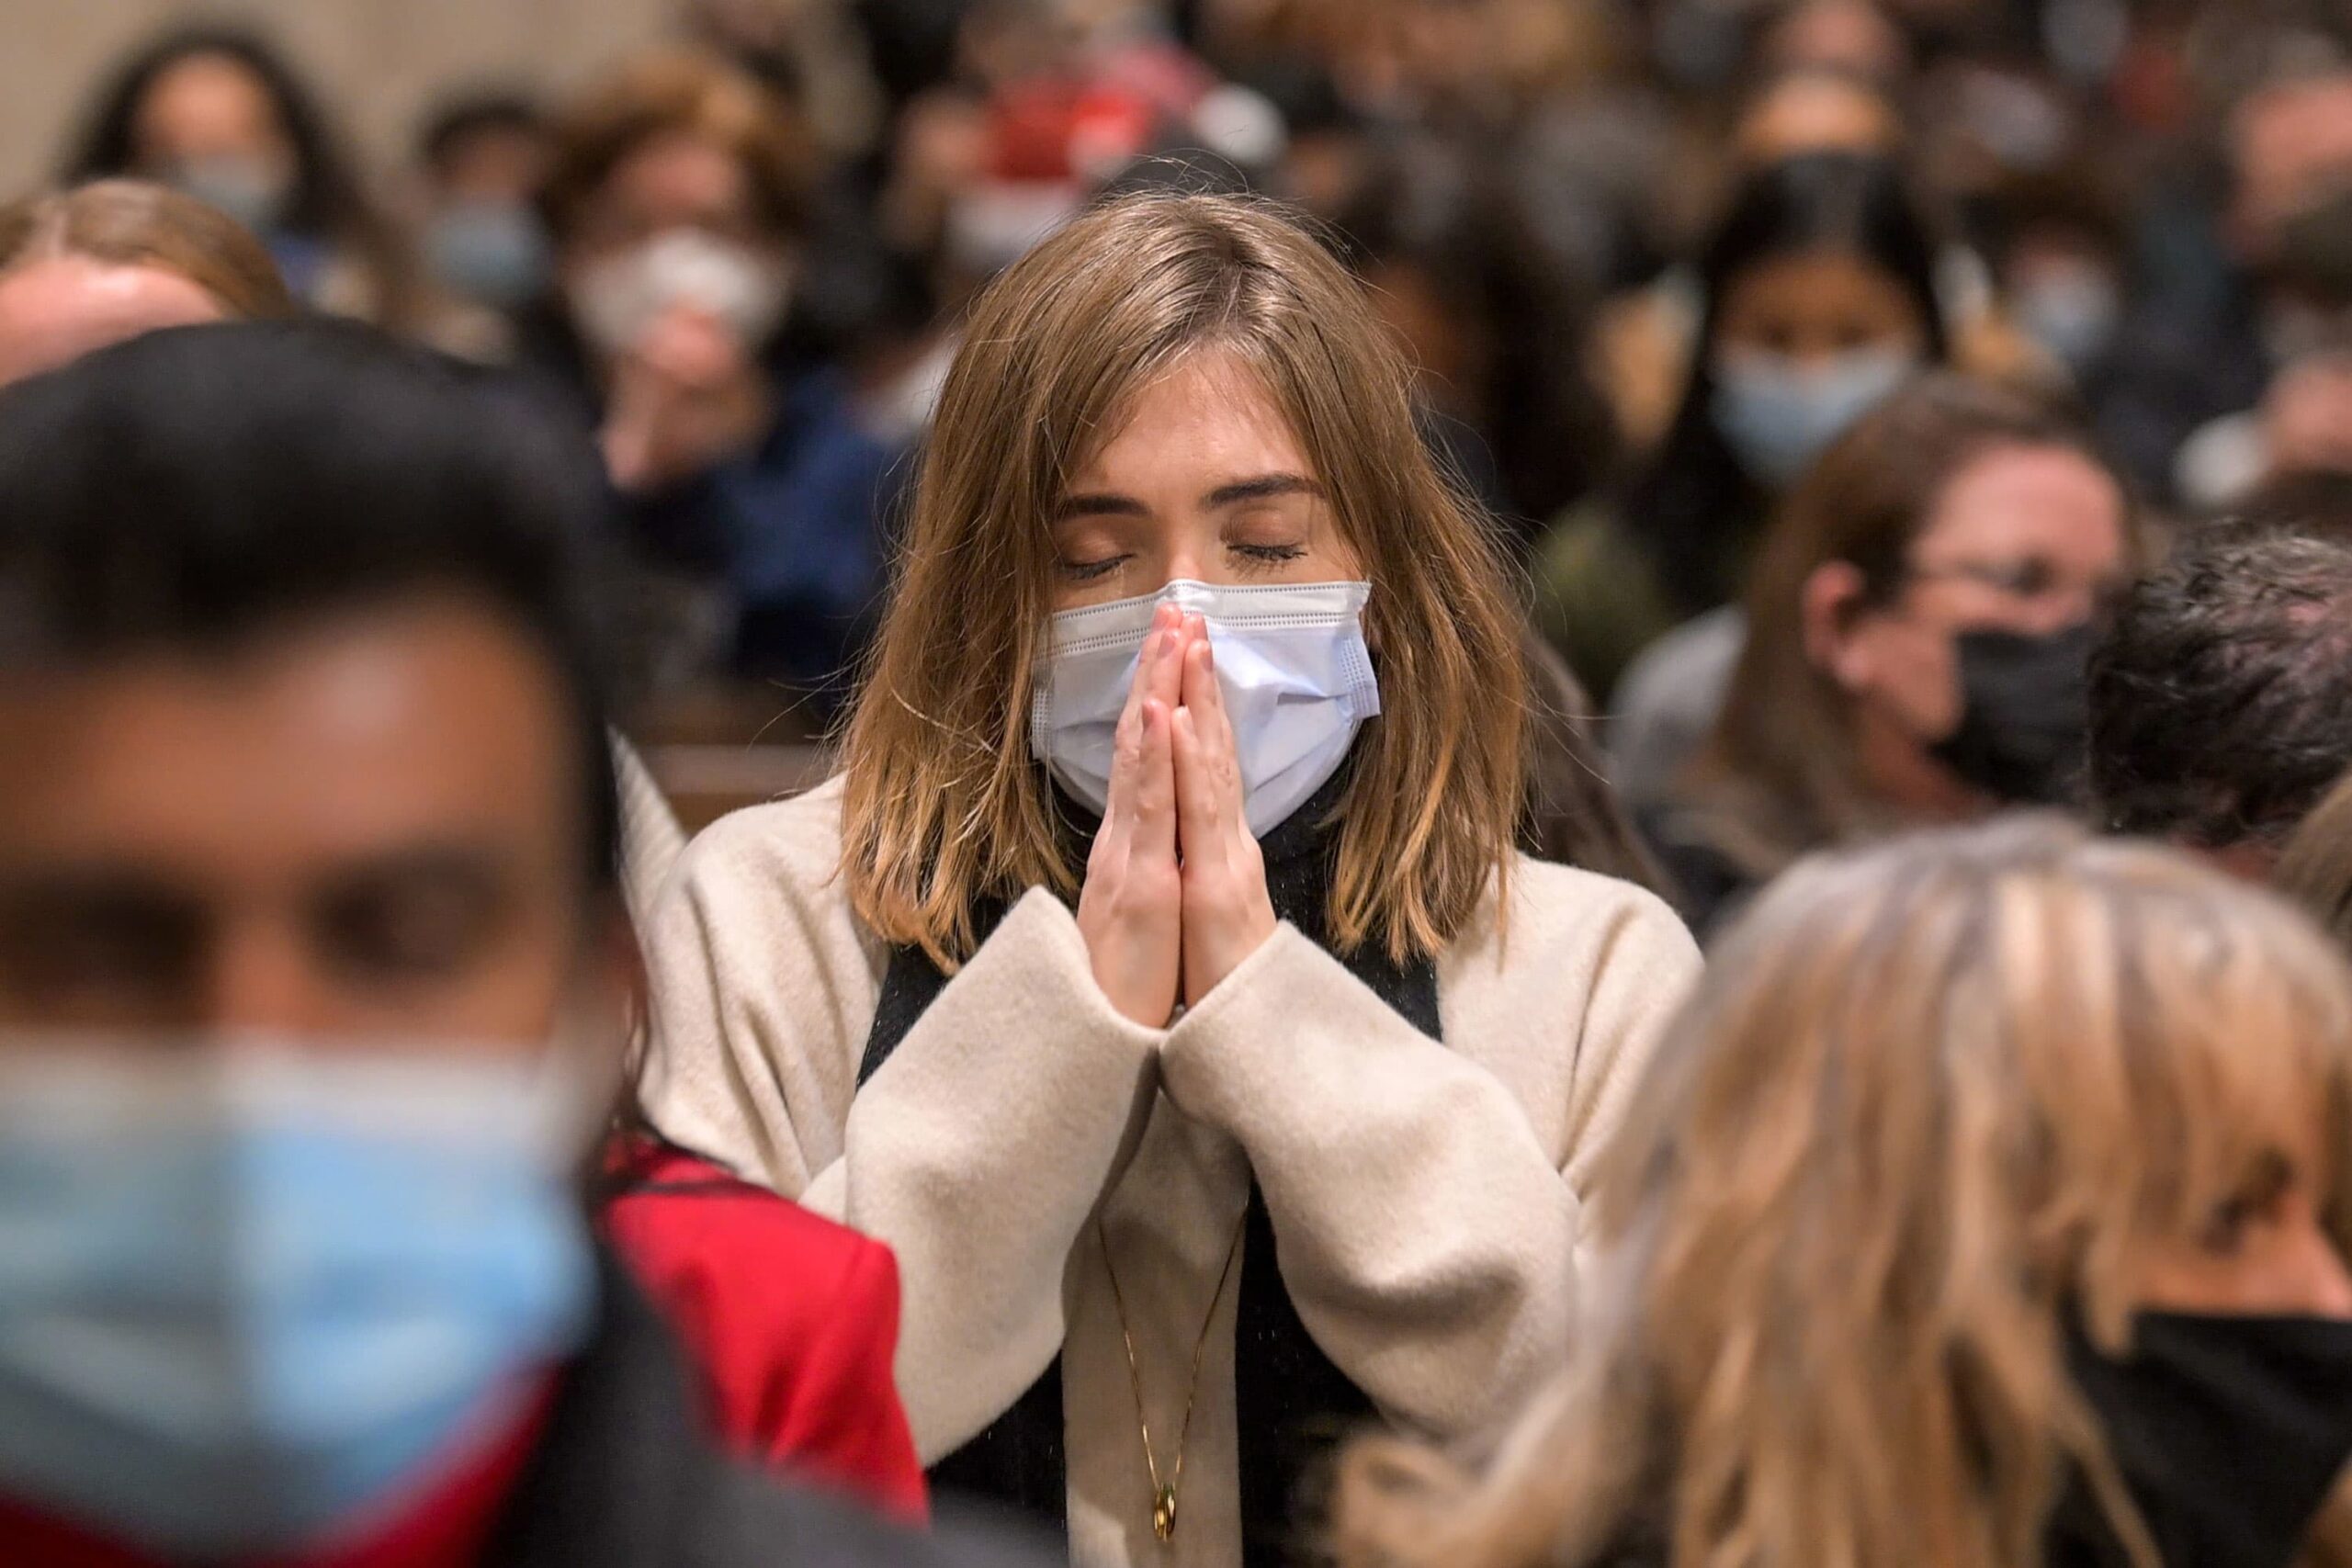 Millennials lead shift away from organized religion as pandemic tests faith